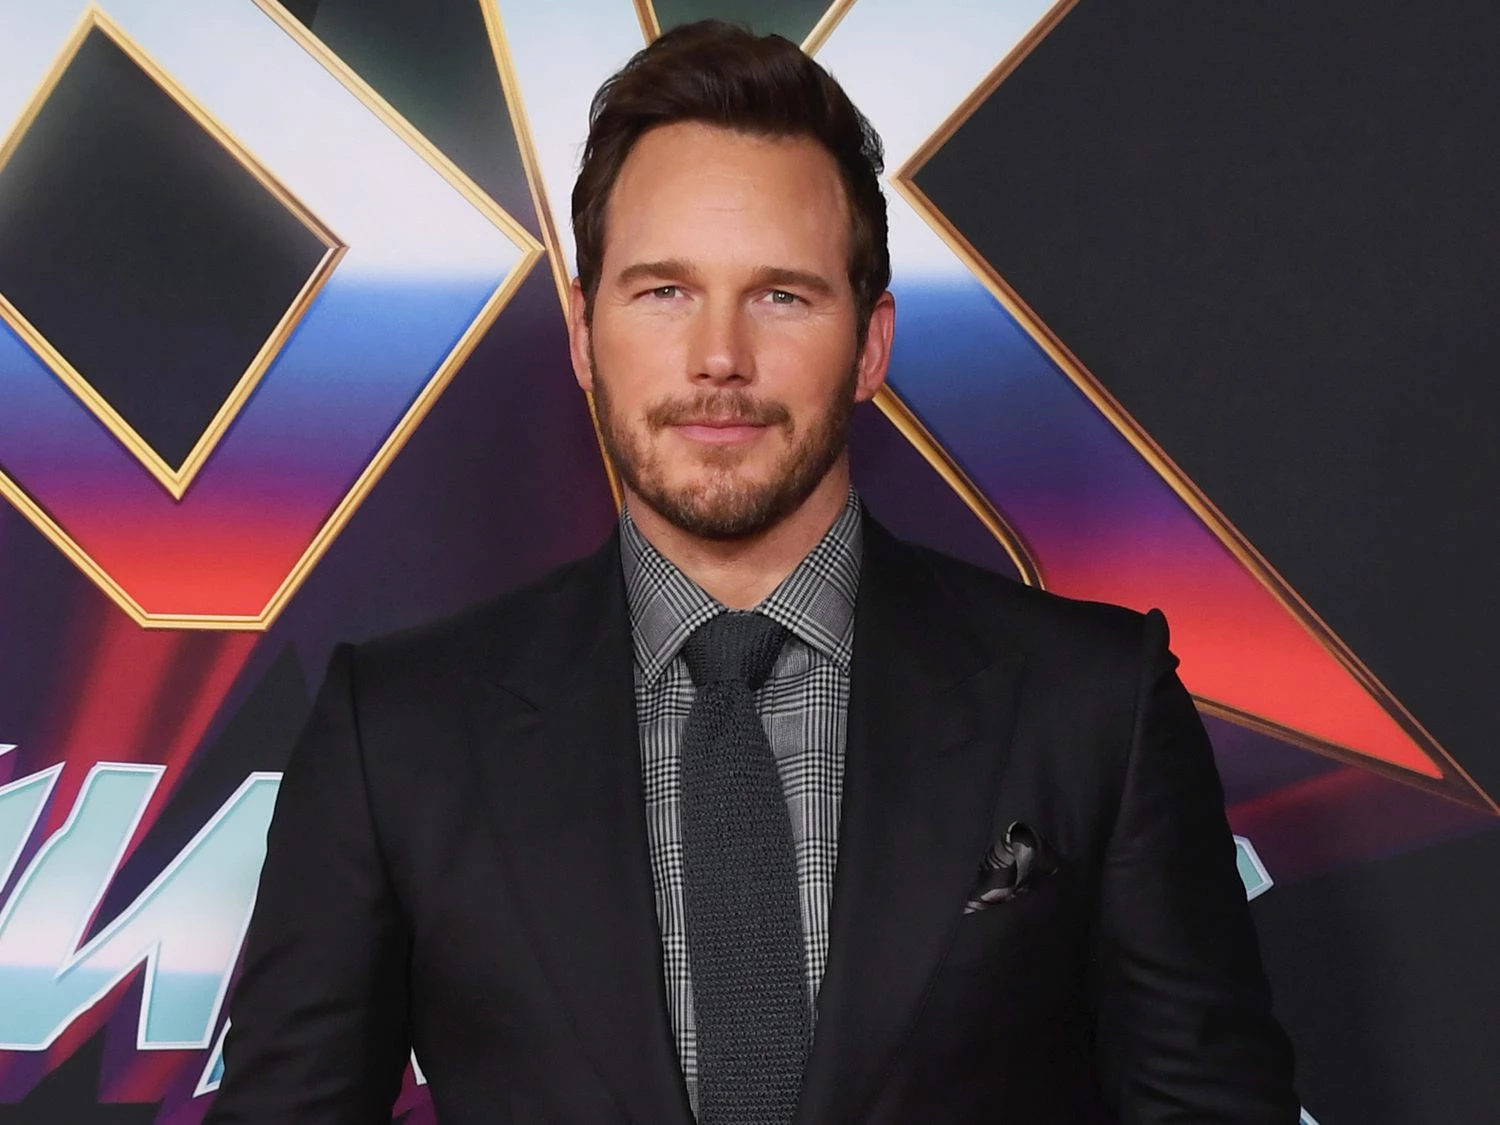 Chris Pratt Is Called “Monkey Boy” By His Dad Due To His Childhood Appearance